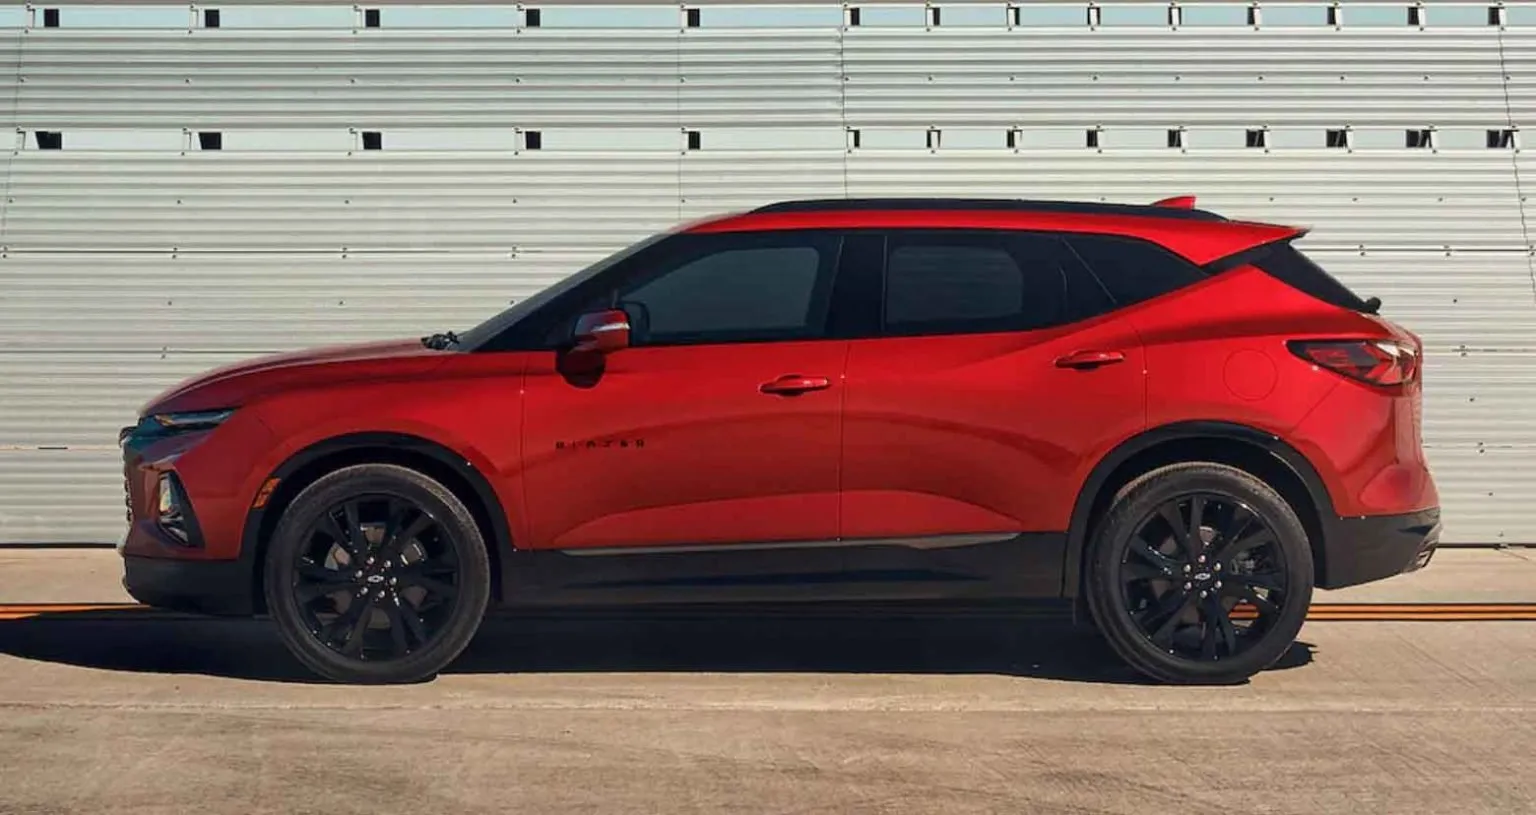 2021 Chevy Blazer The Return Of The Icon